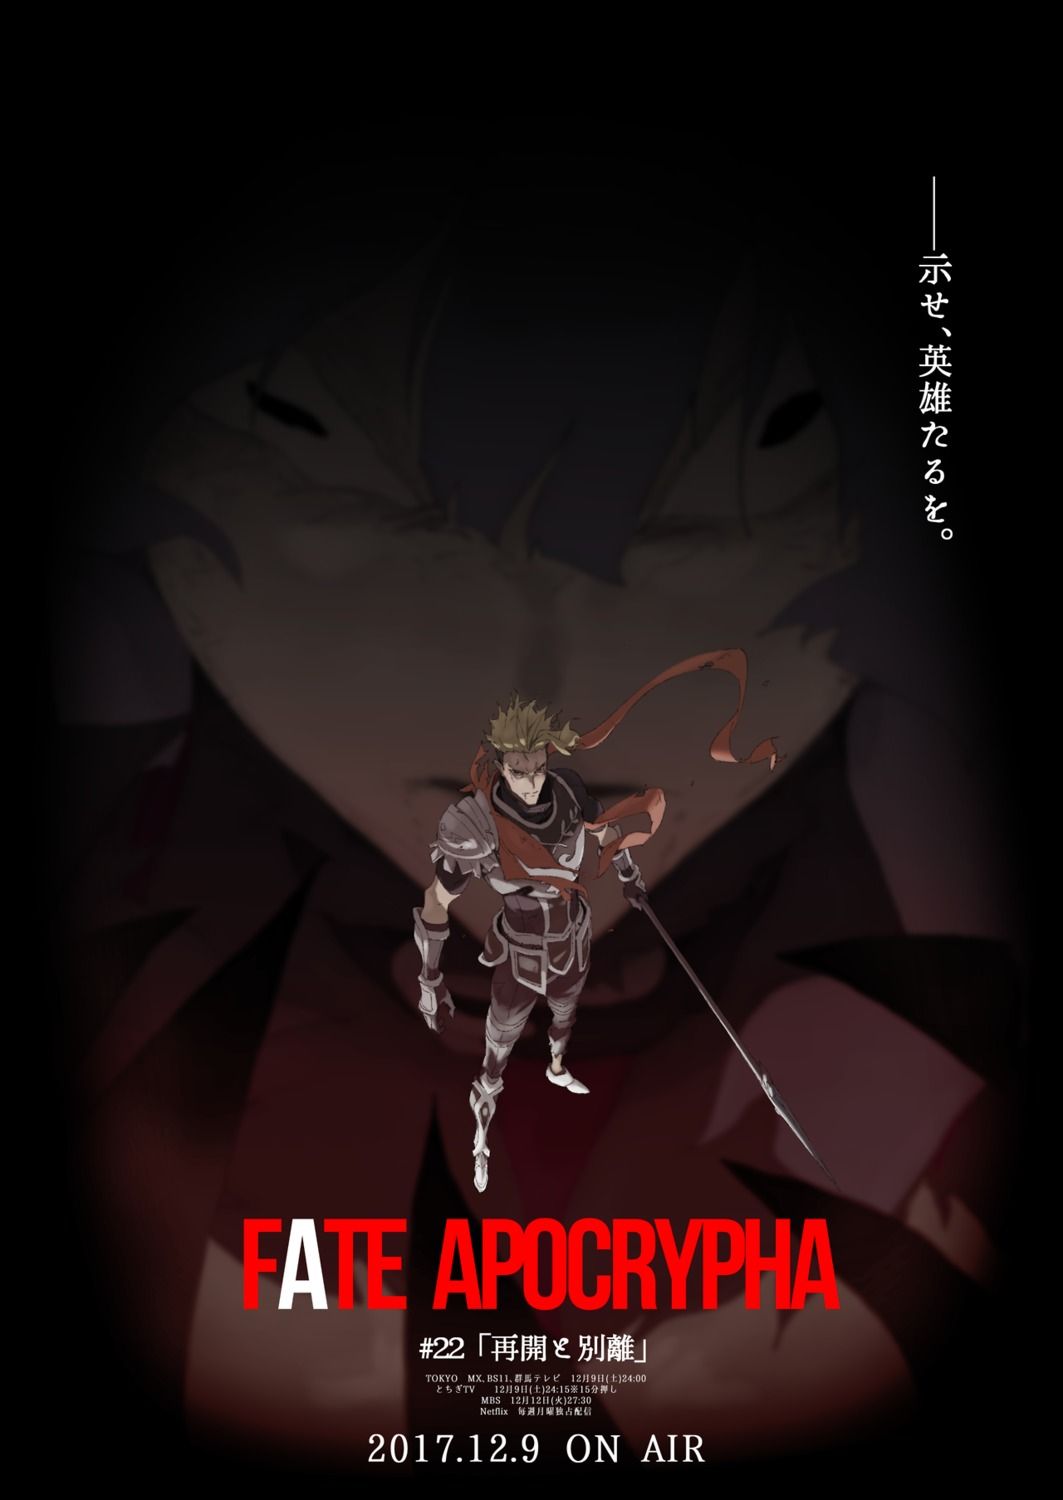 Fate Apocrypha #22 poster